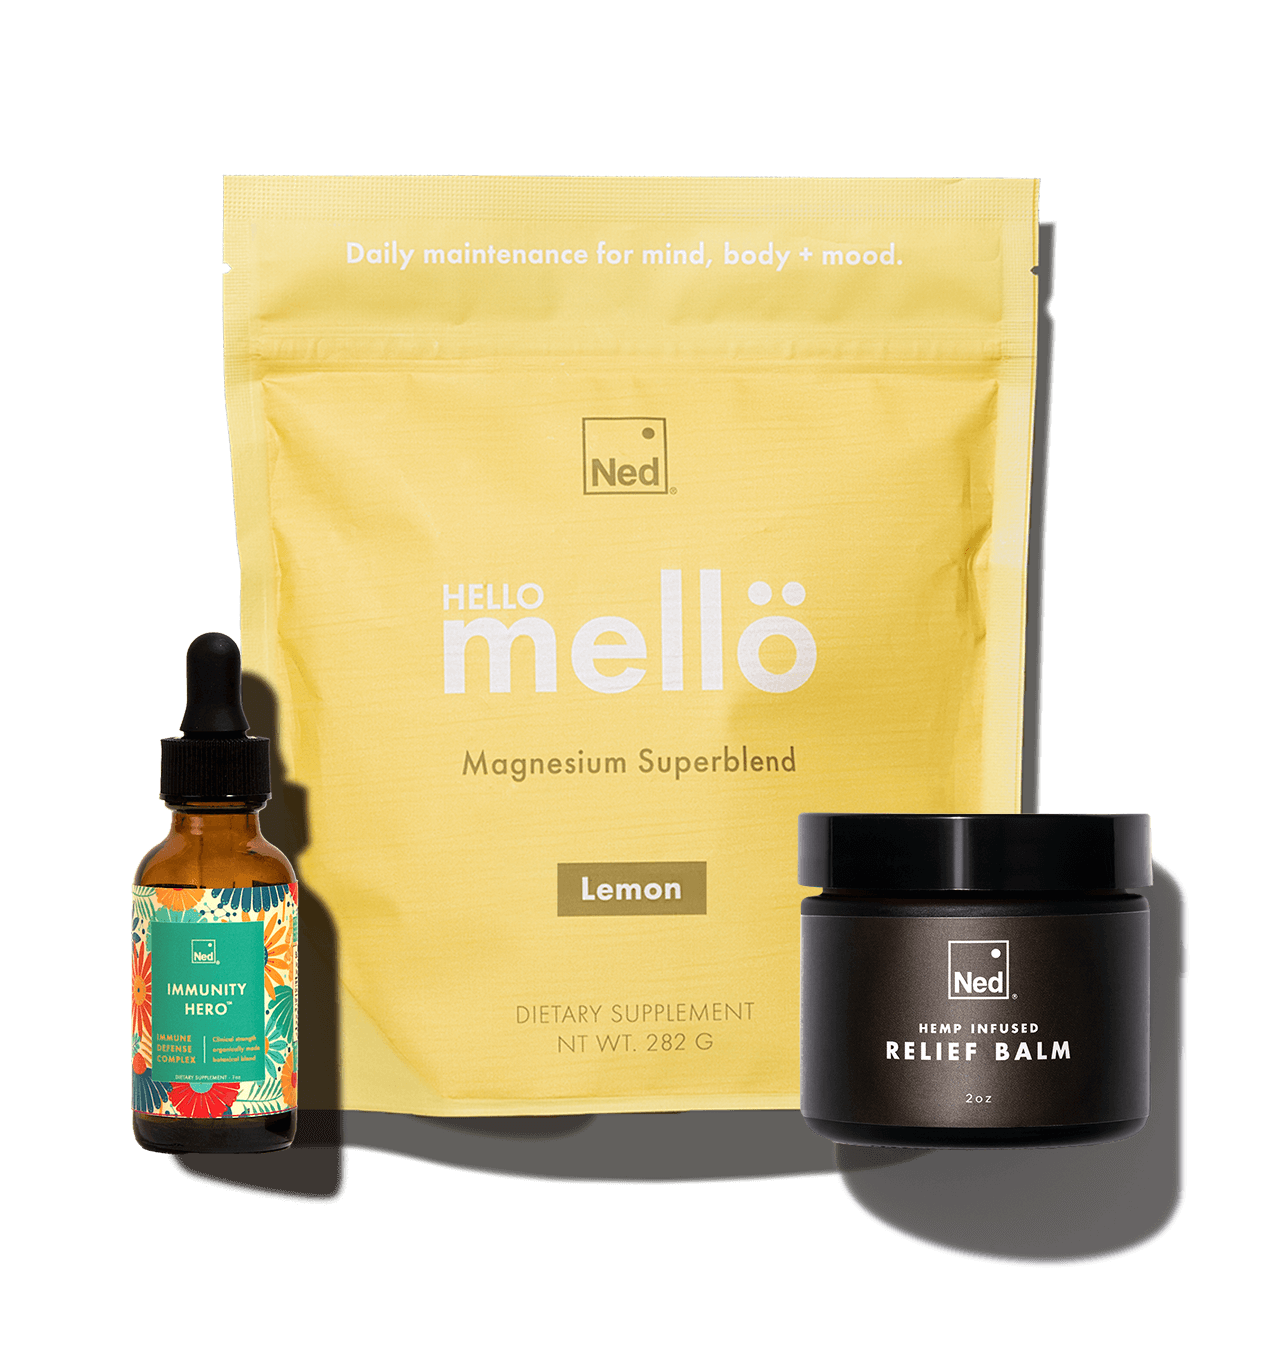 Ned Bundle with Immunity Hero, Lemon Mello Pouch, and Relief Balm